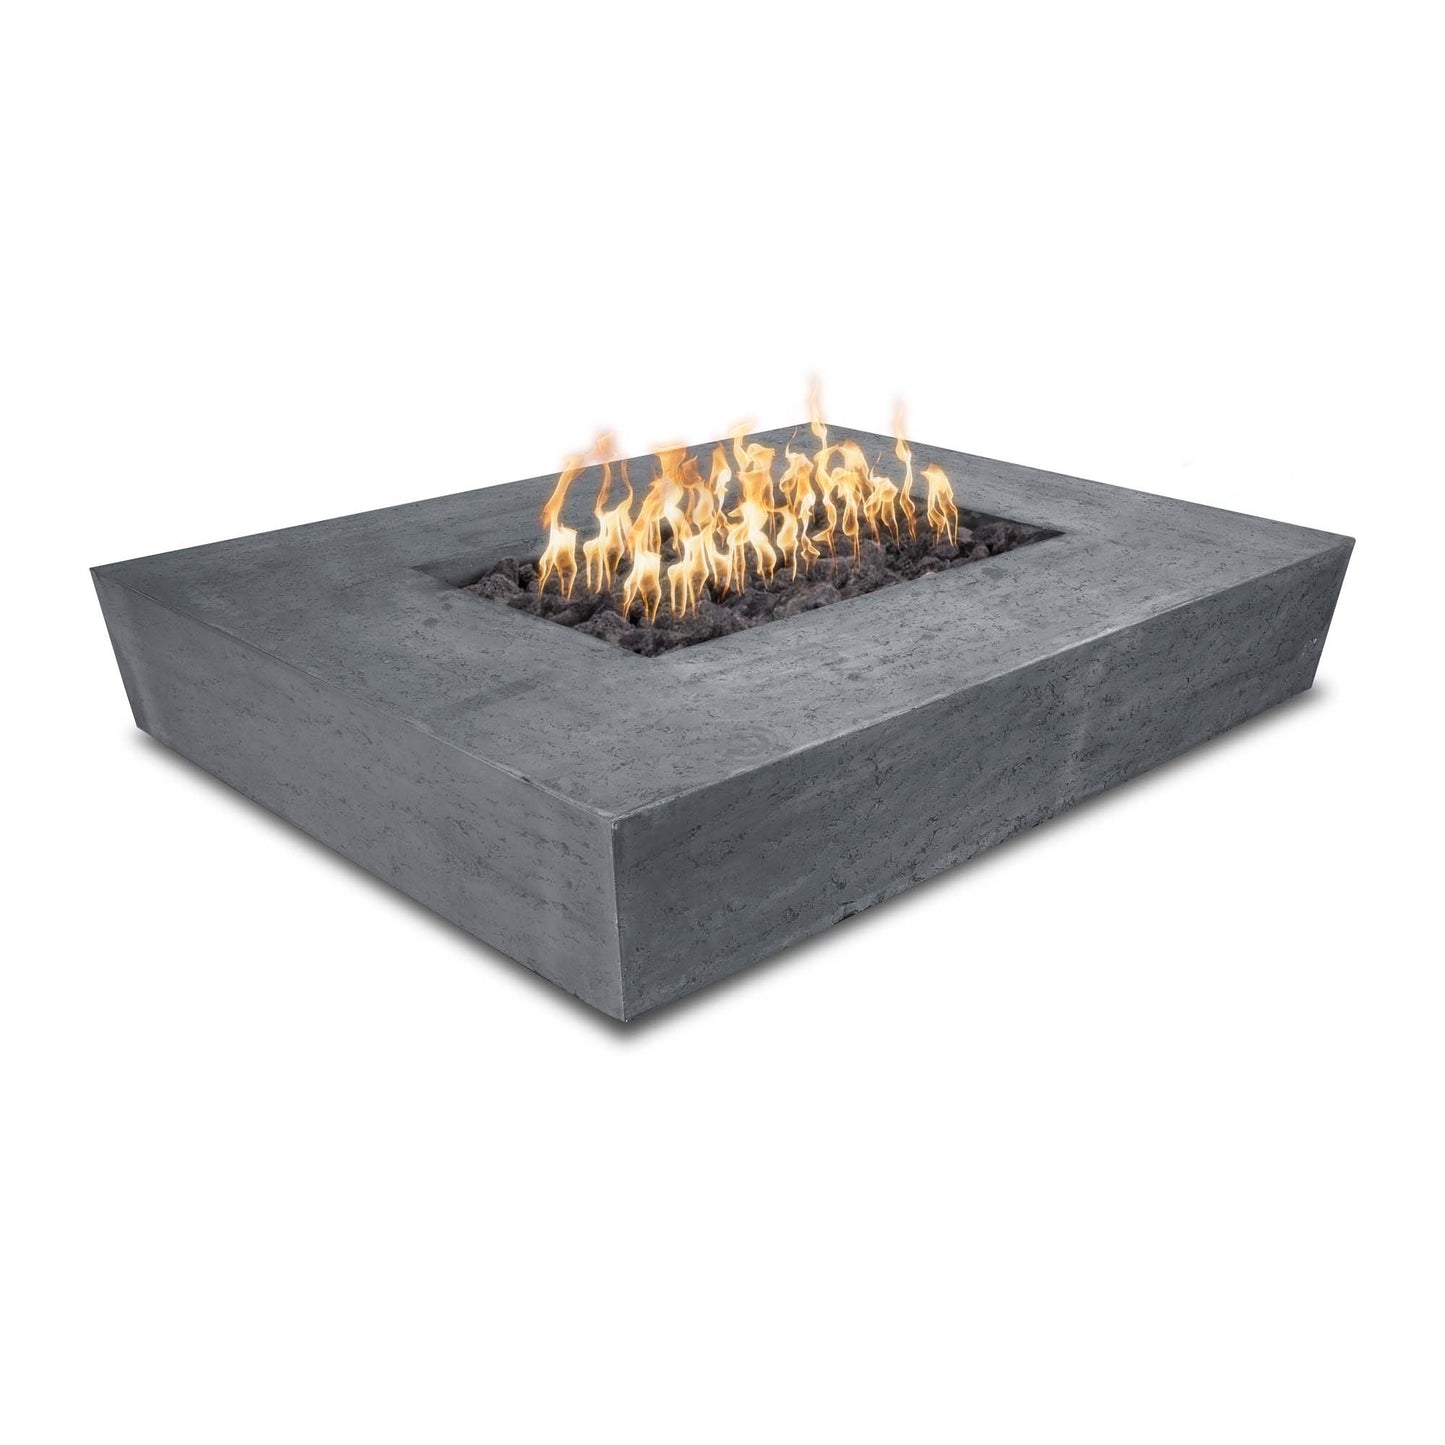 The Outdoor Plus Rectangular Heiko 58" Metallic Silver GFRC Concrete Natural Gas Fire Pit with Flame Sense with Spark Ignition